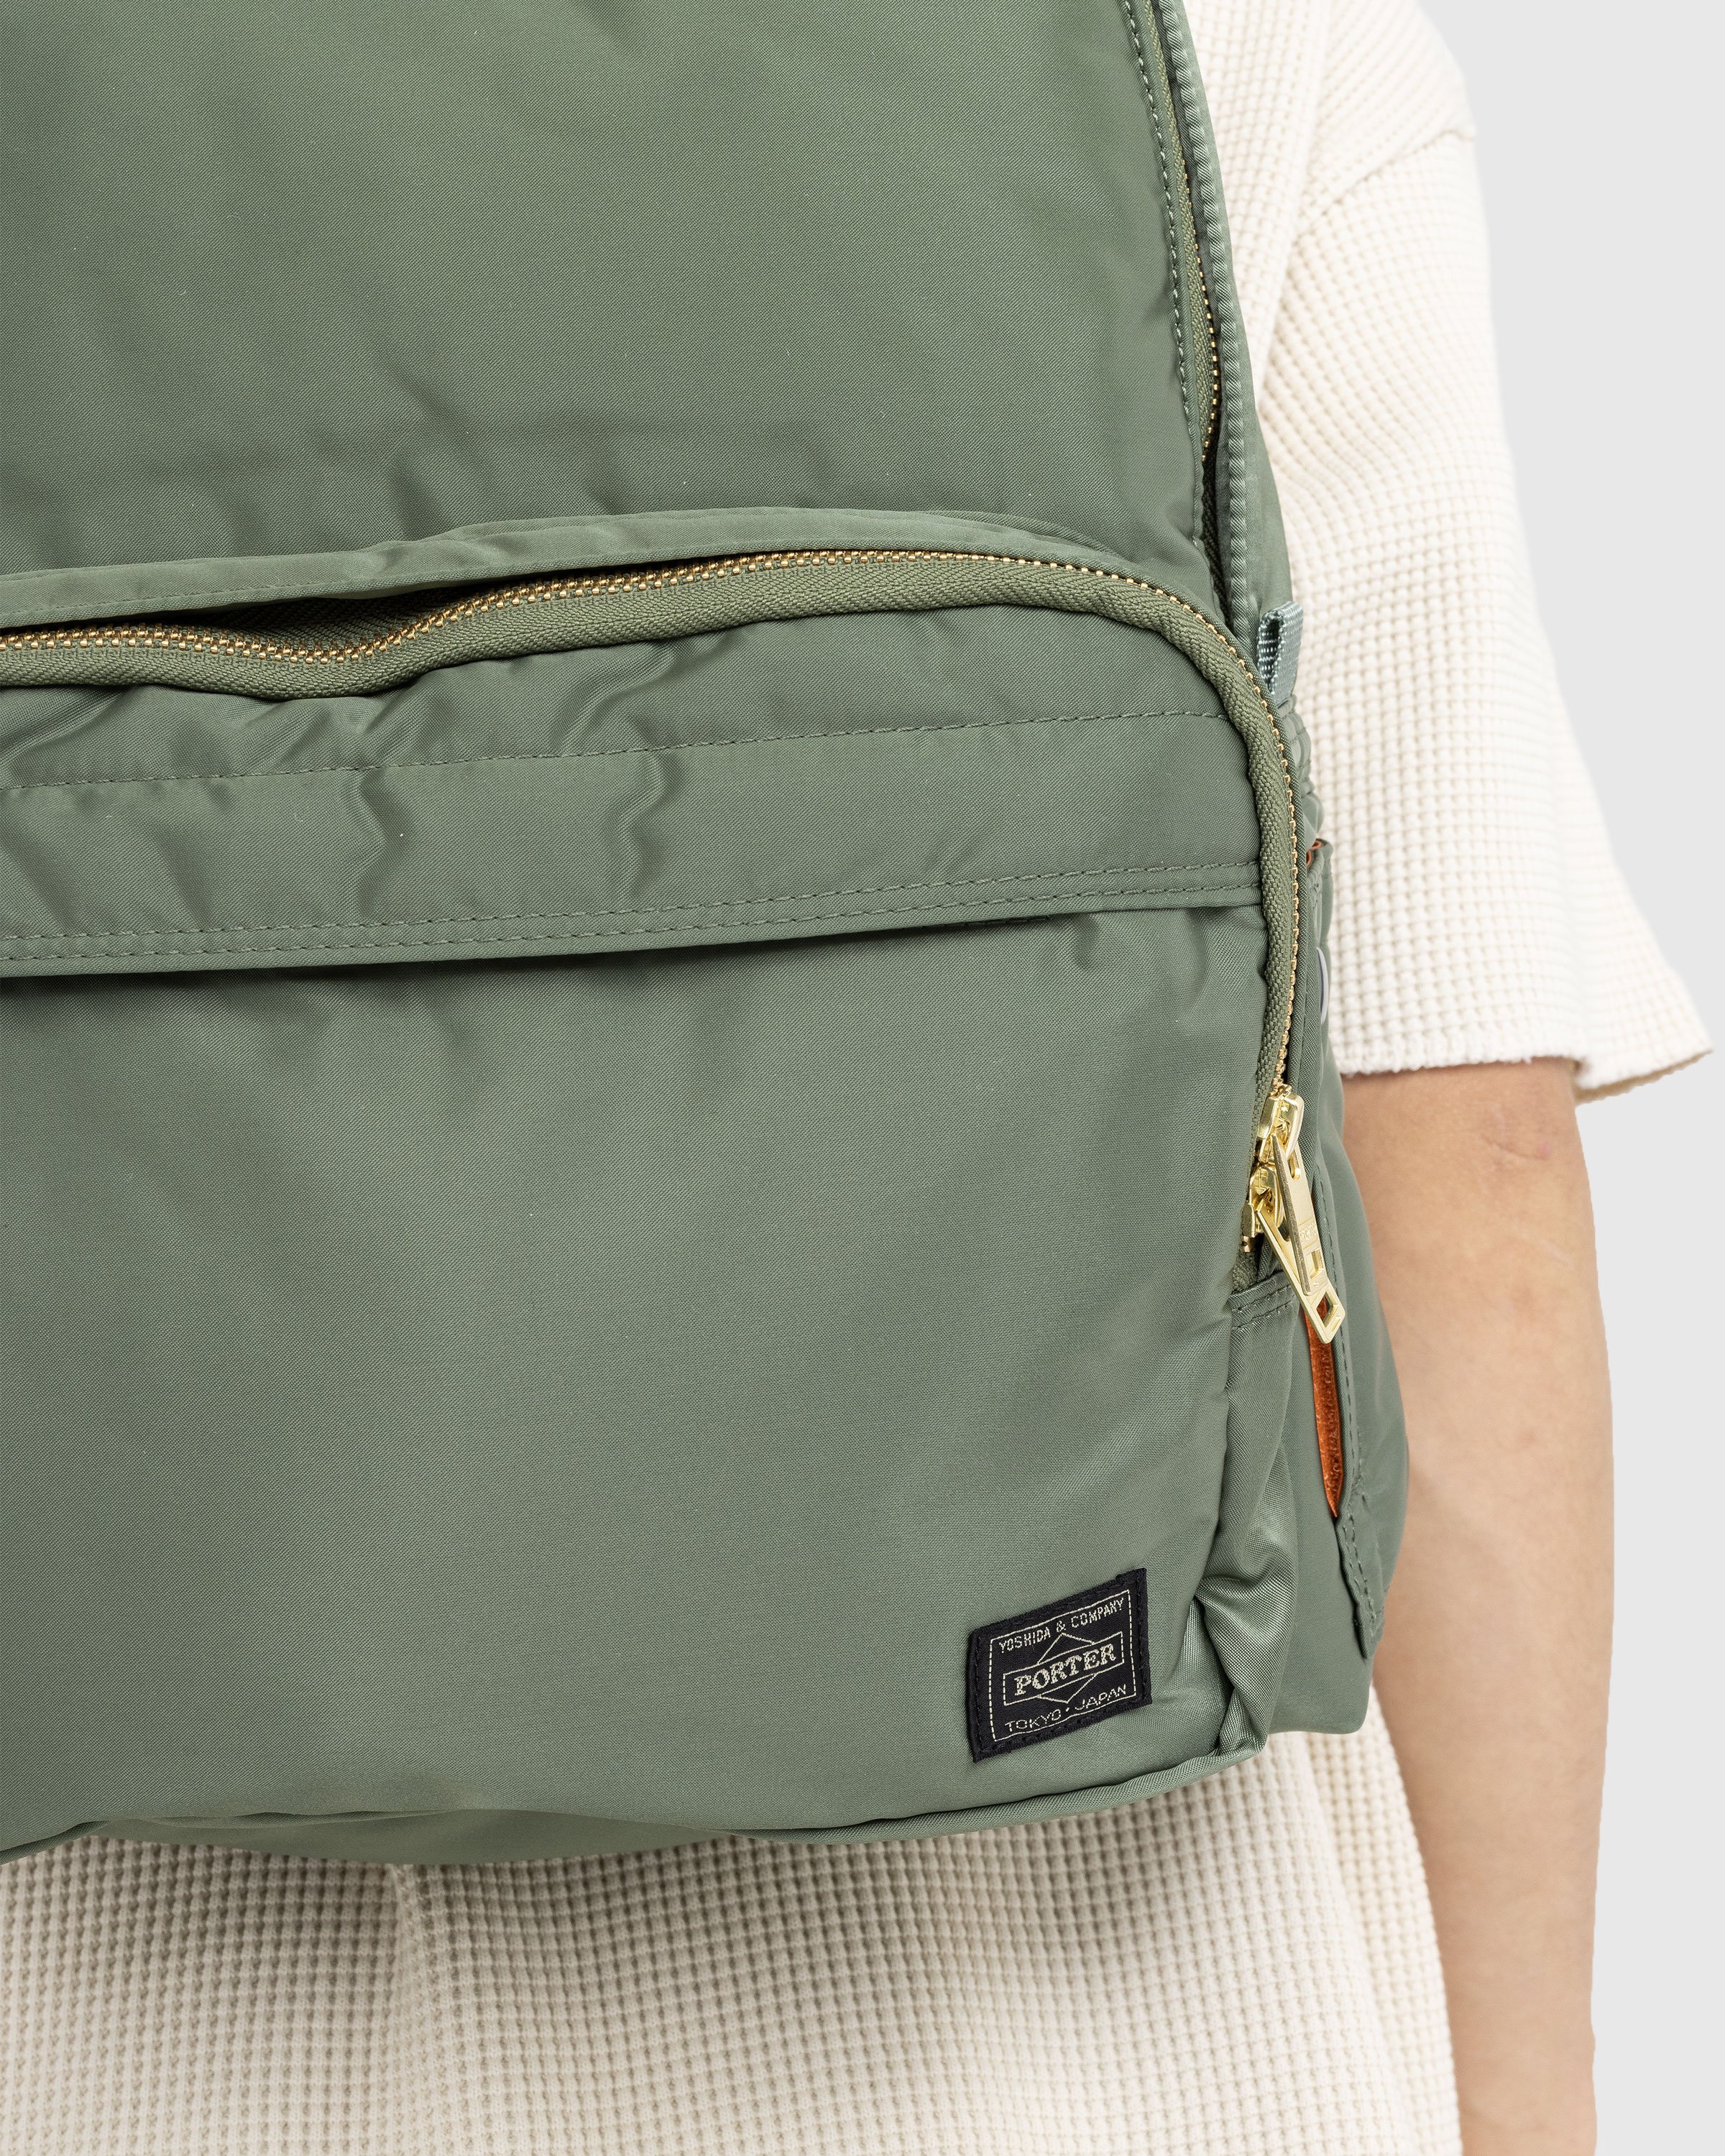 Porter-Yoshida & Co. - Tanker Day Pack - Accessories - Green - Image 5